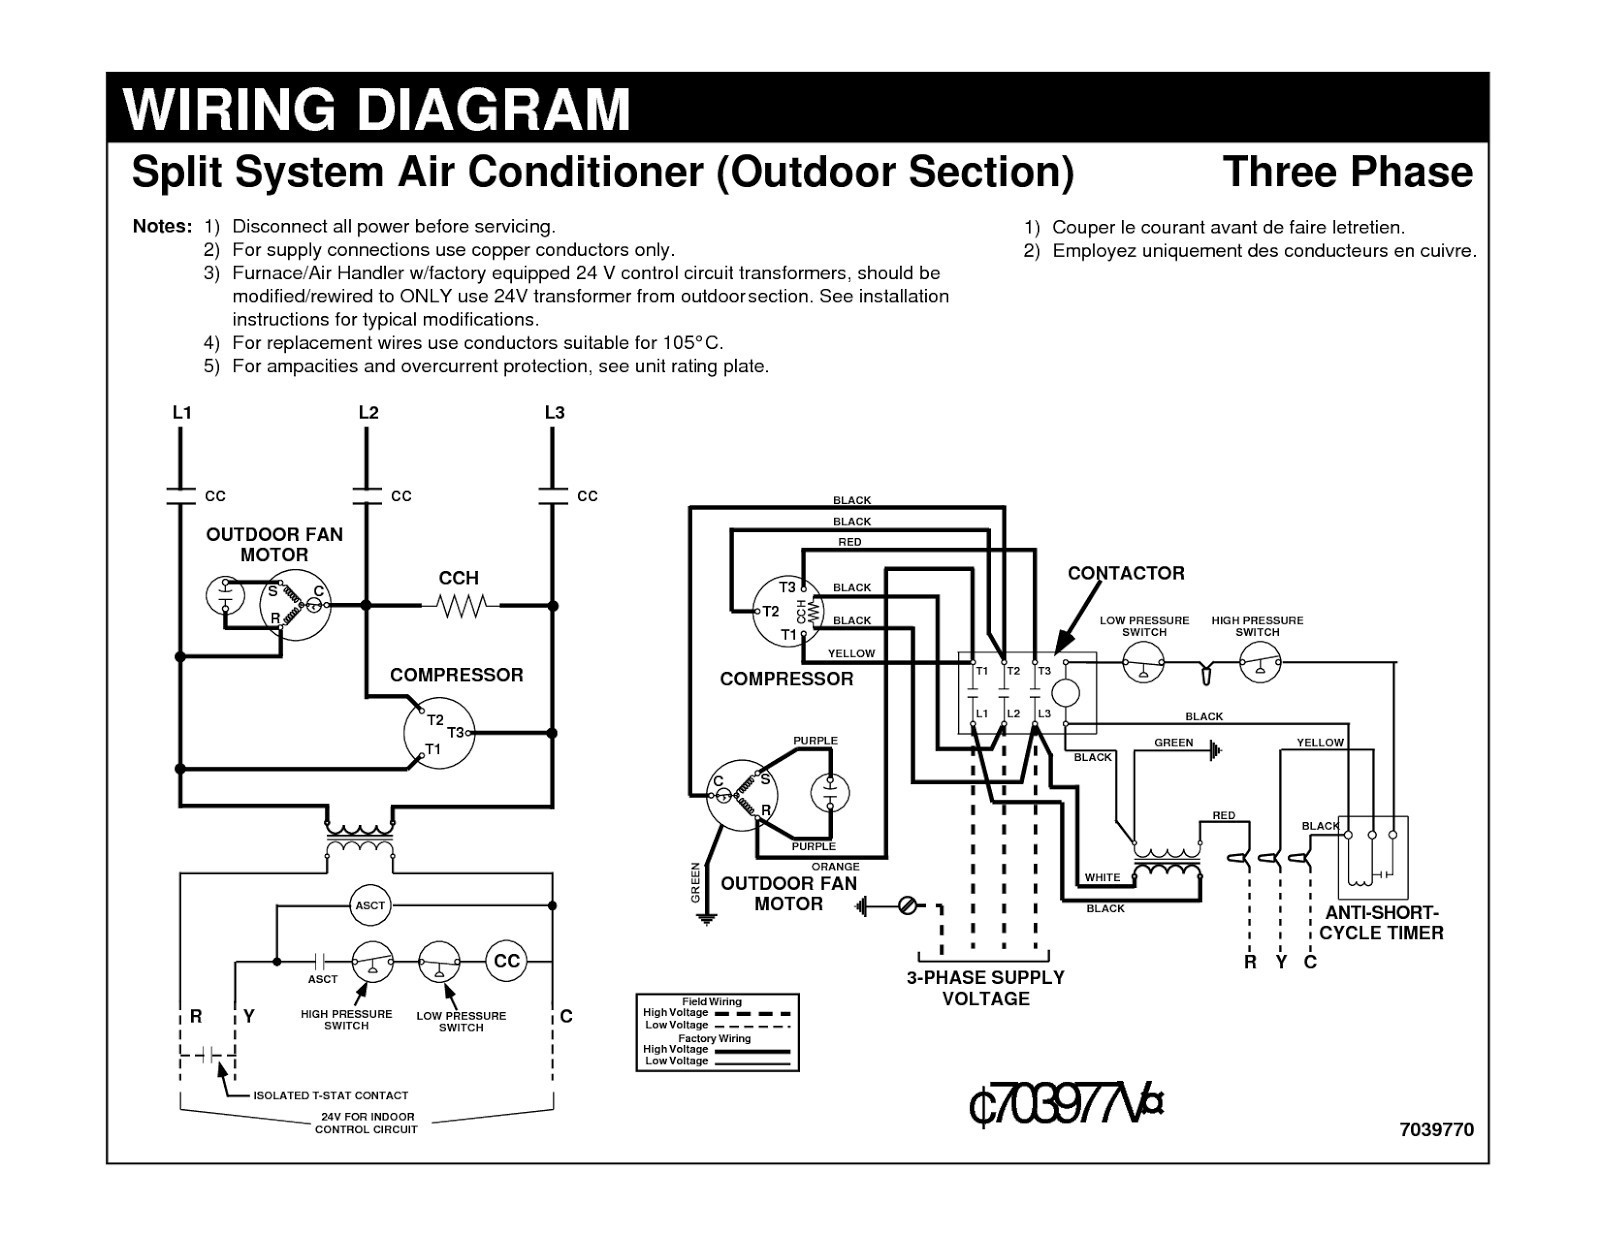 Wiring Diagram For Central Ac Unit New Best Air Conditioner Picture - Central A C Wiring Diagram